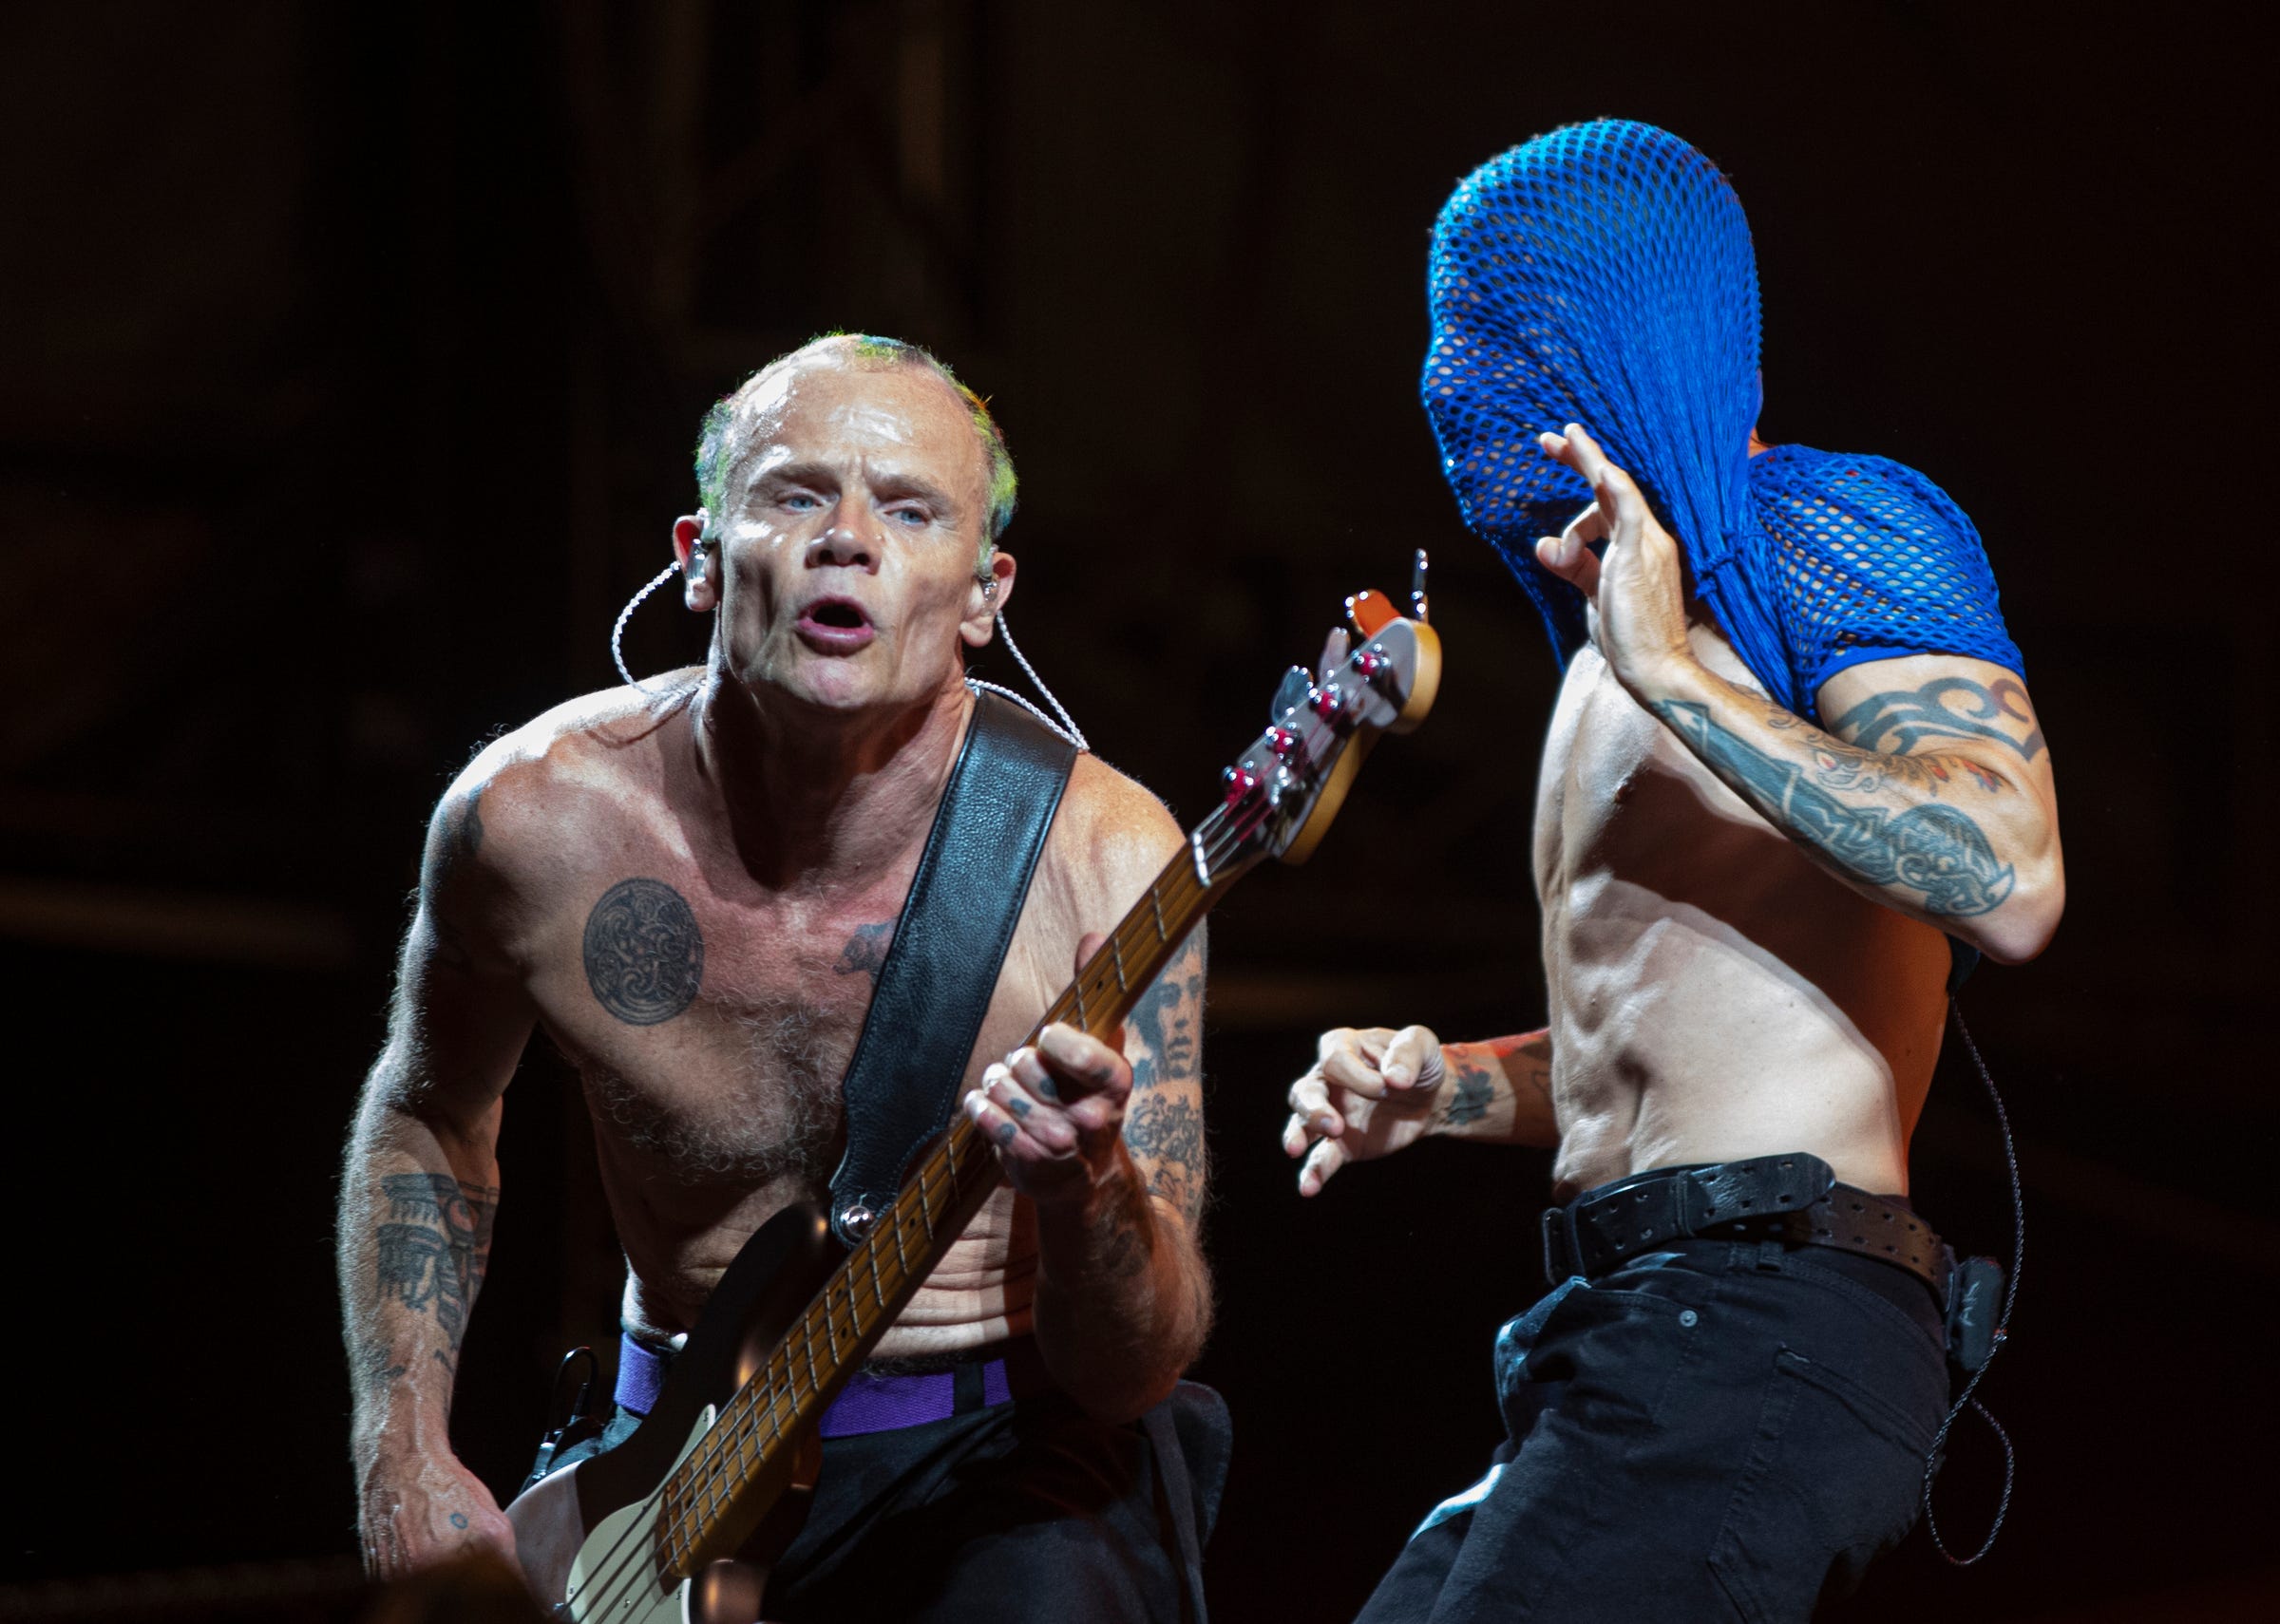 Red Hot Chili Peppers Bring The Funk Rock To 34 000 At Comerica Park